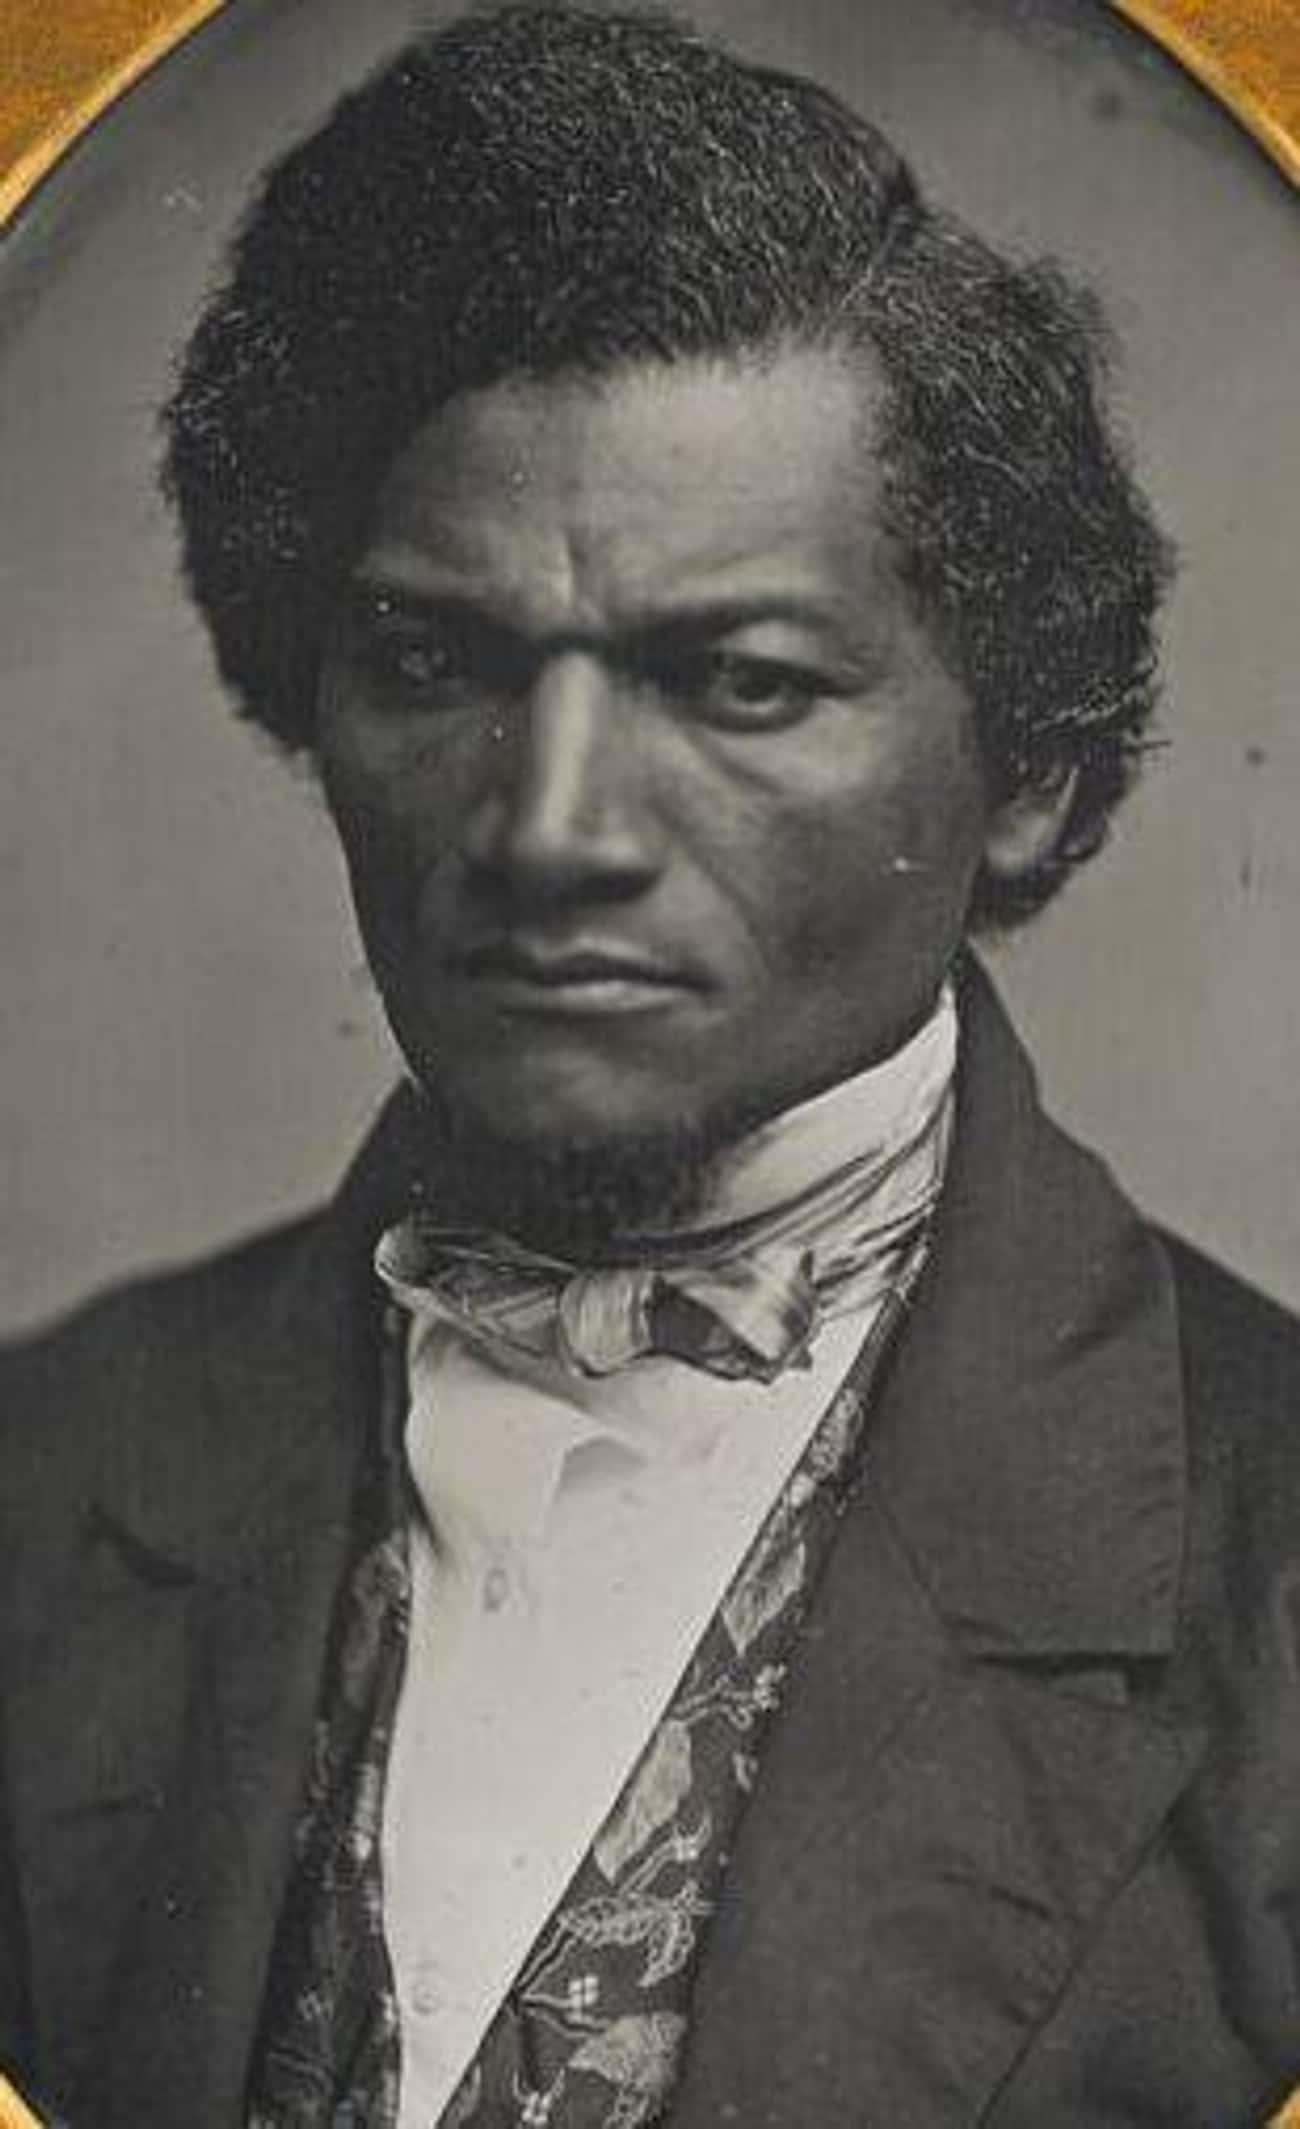 Frederick Douglass, 'What To The Slave Is The Fourth Of July?' - July 5, 1852